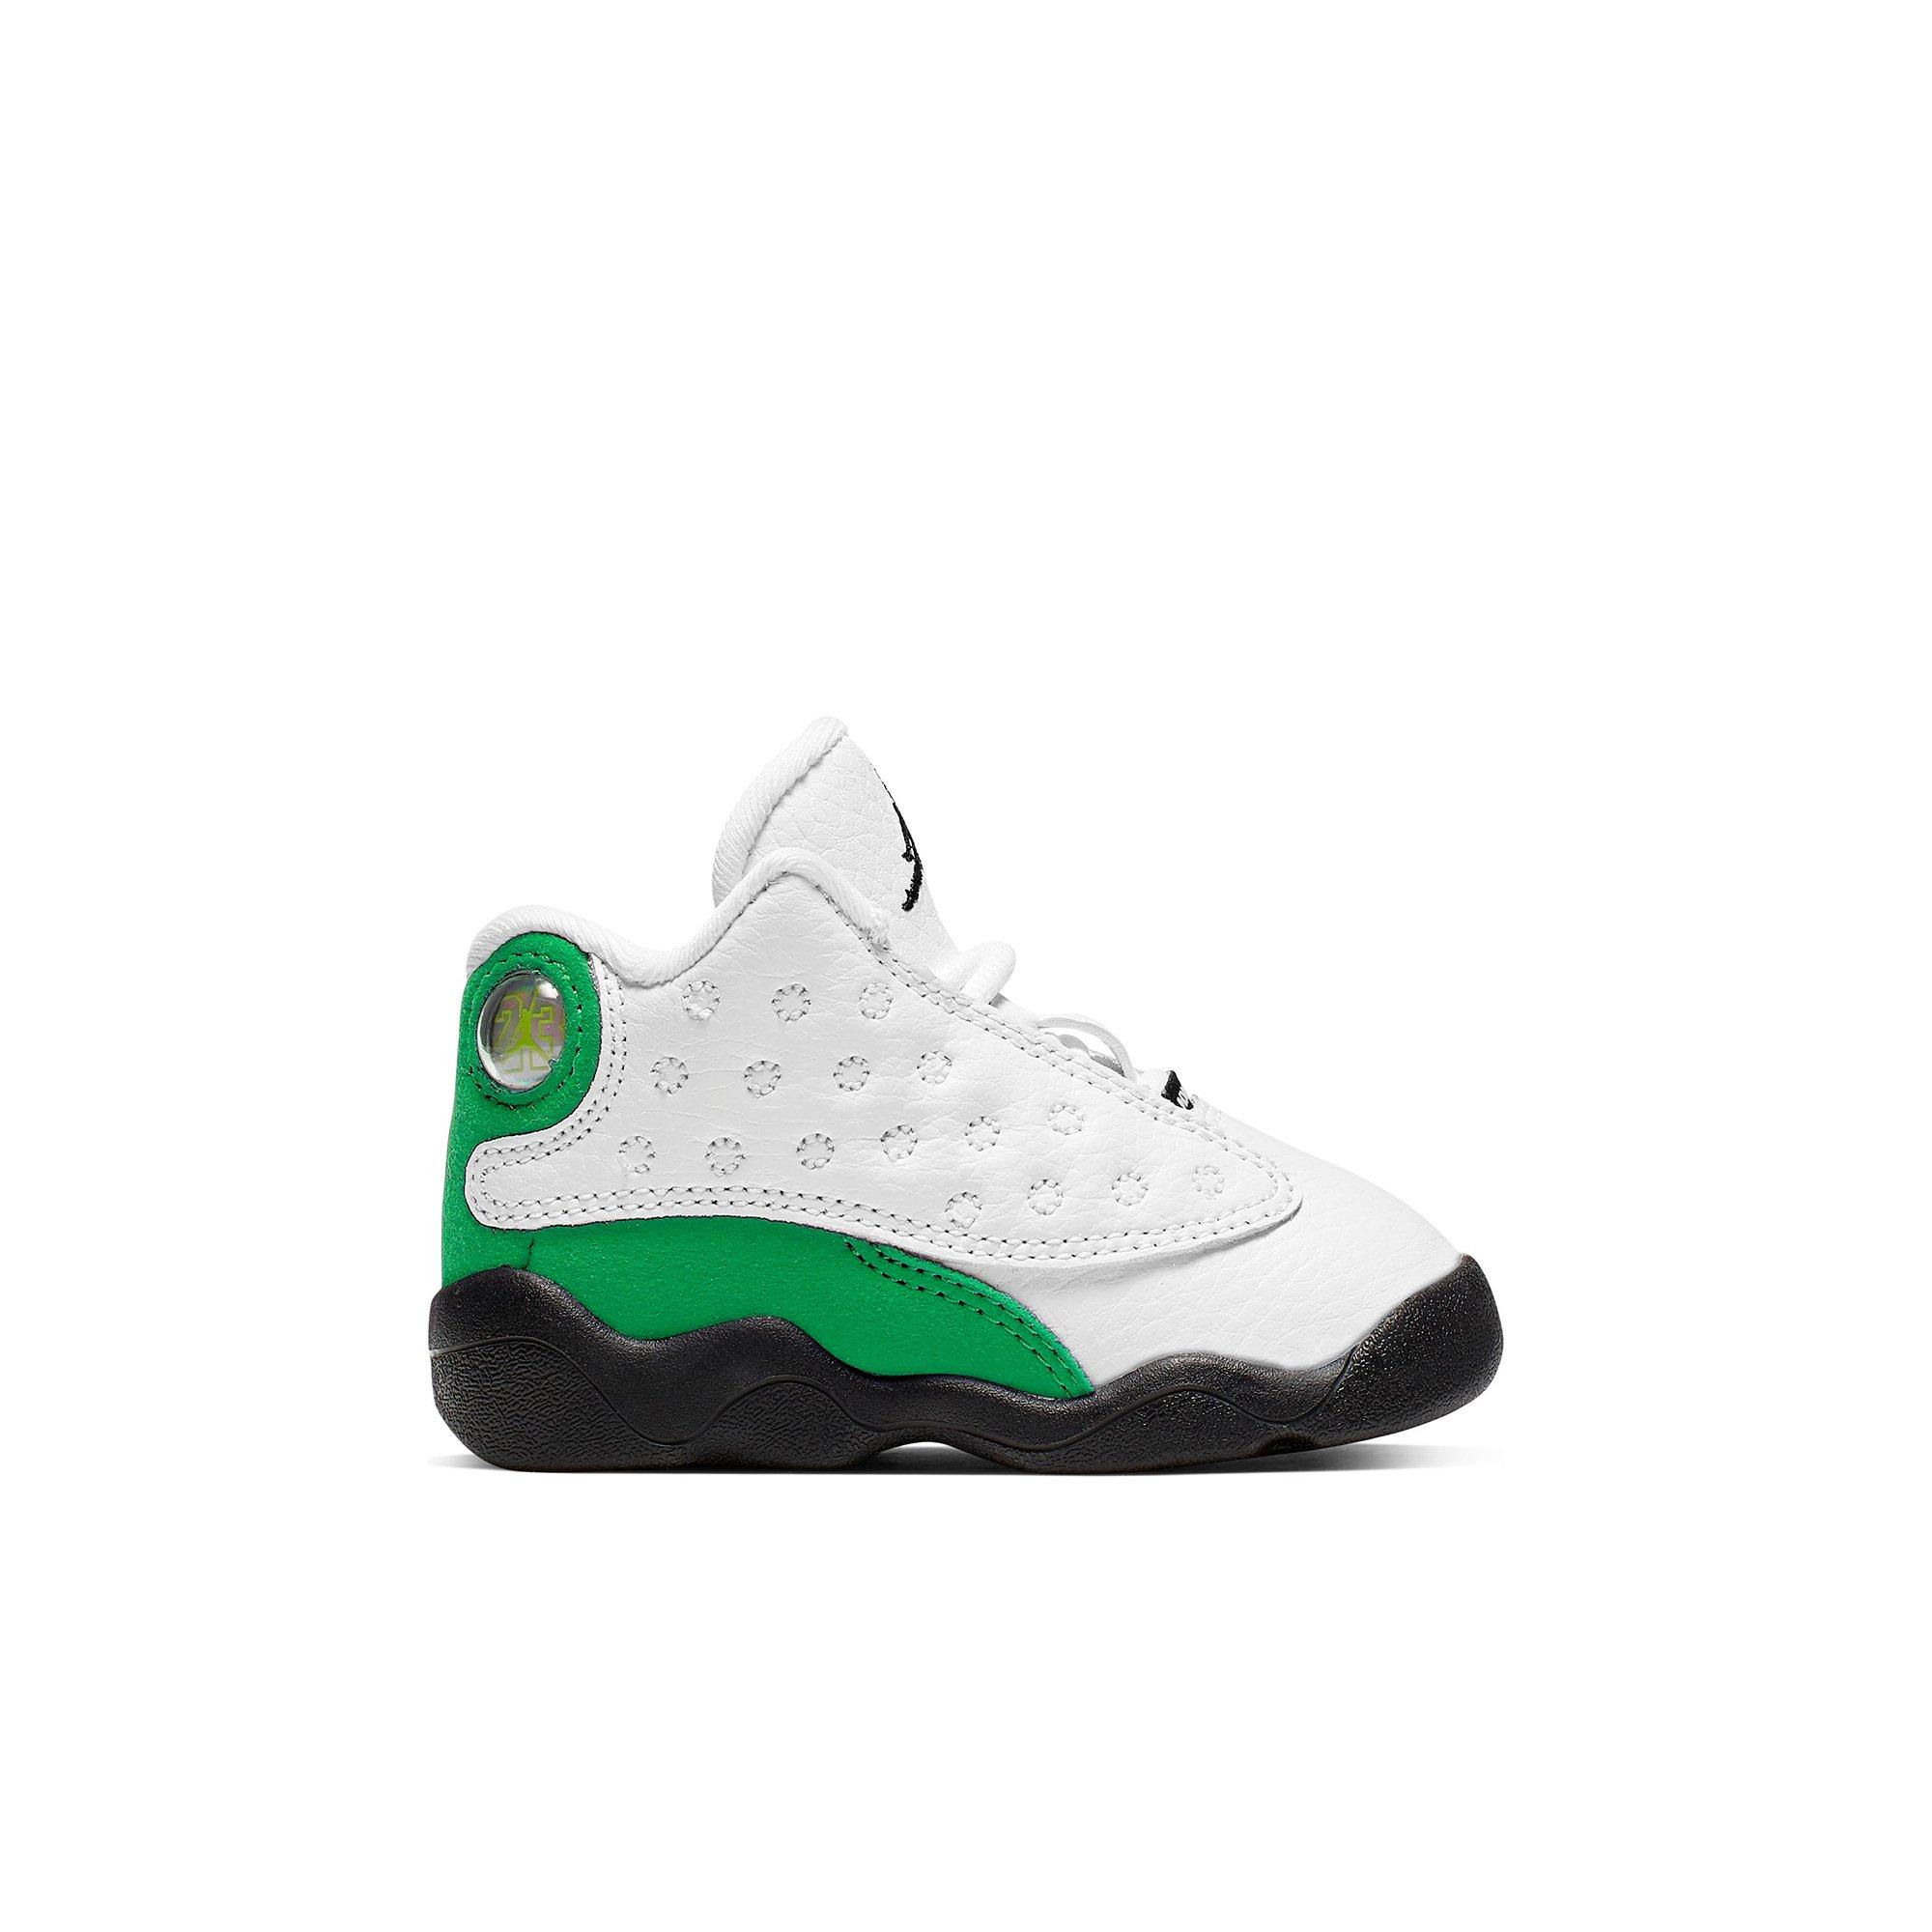 retro 13 for toddlers